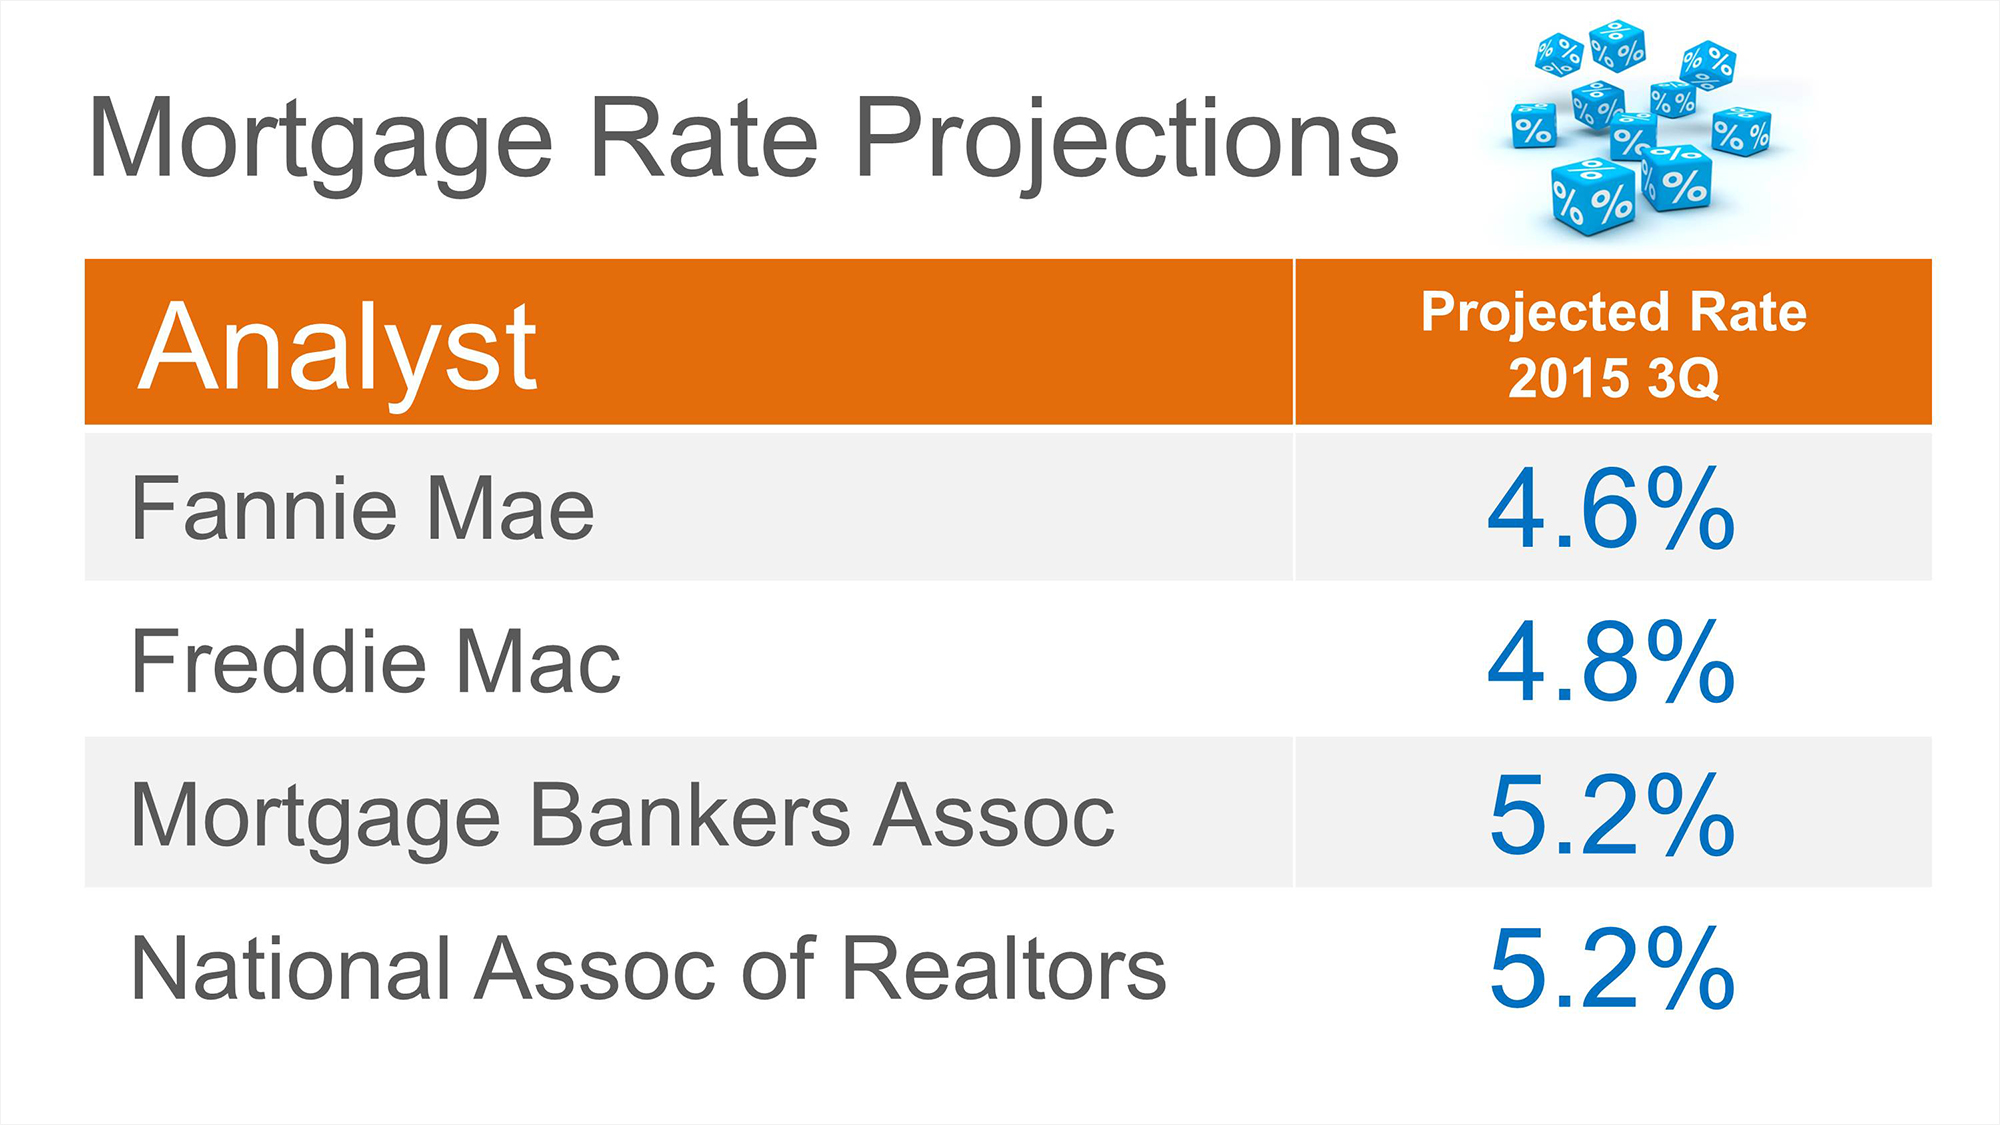 Mortgage Rate Projections | Keeping Current Matters